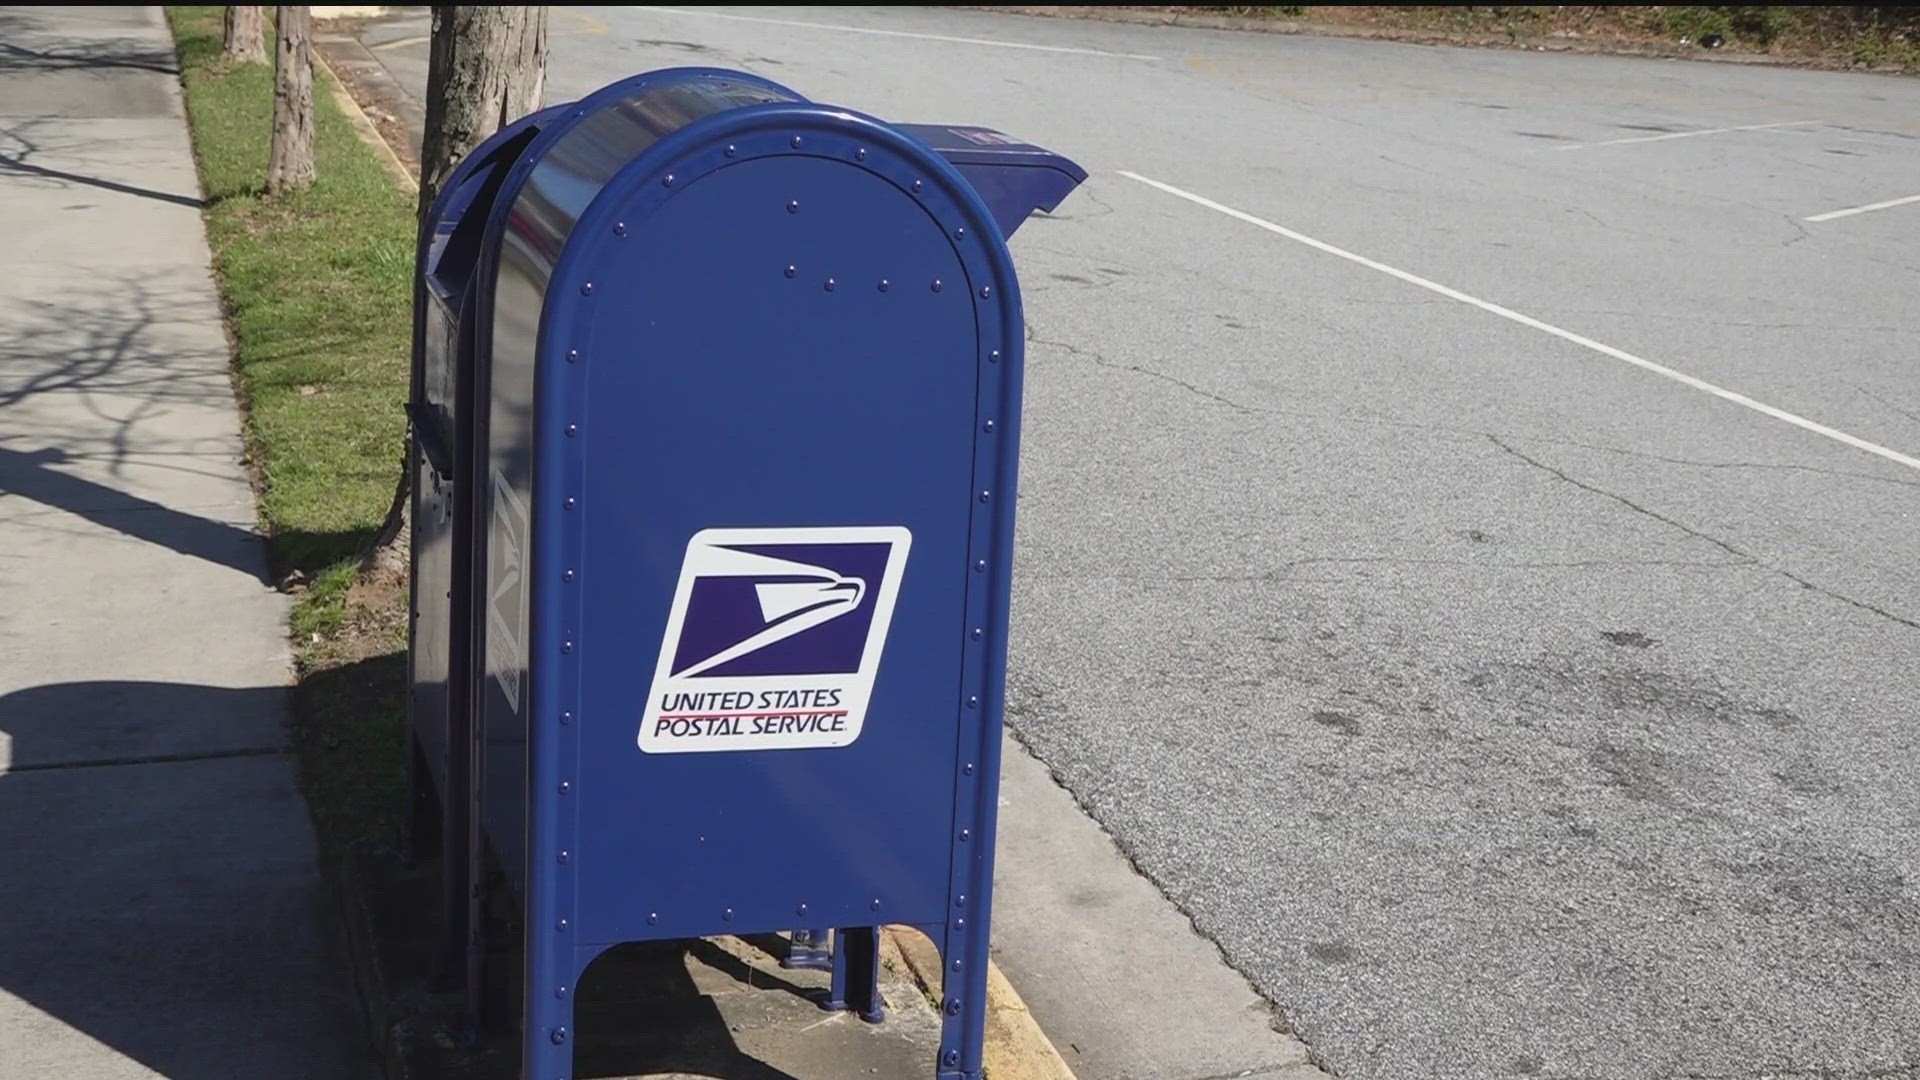 People tell 11Alive the problems stem from the new Palmetto USPS Distribution Center